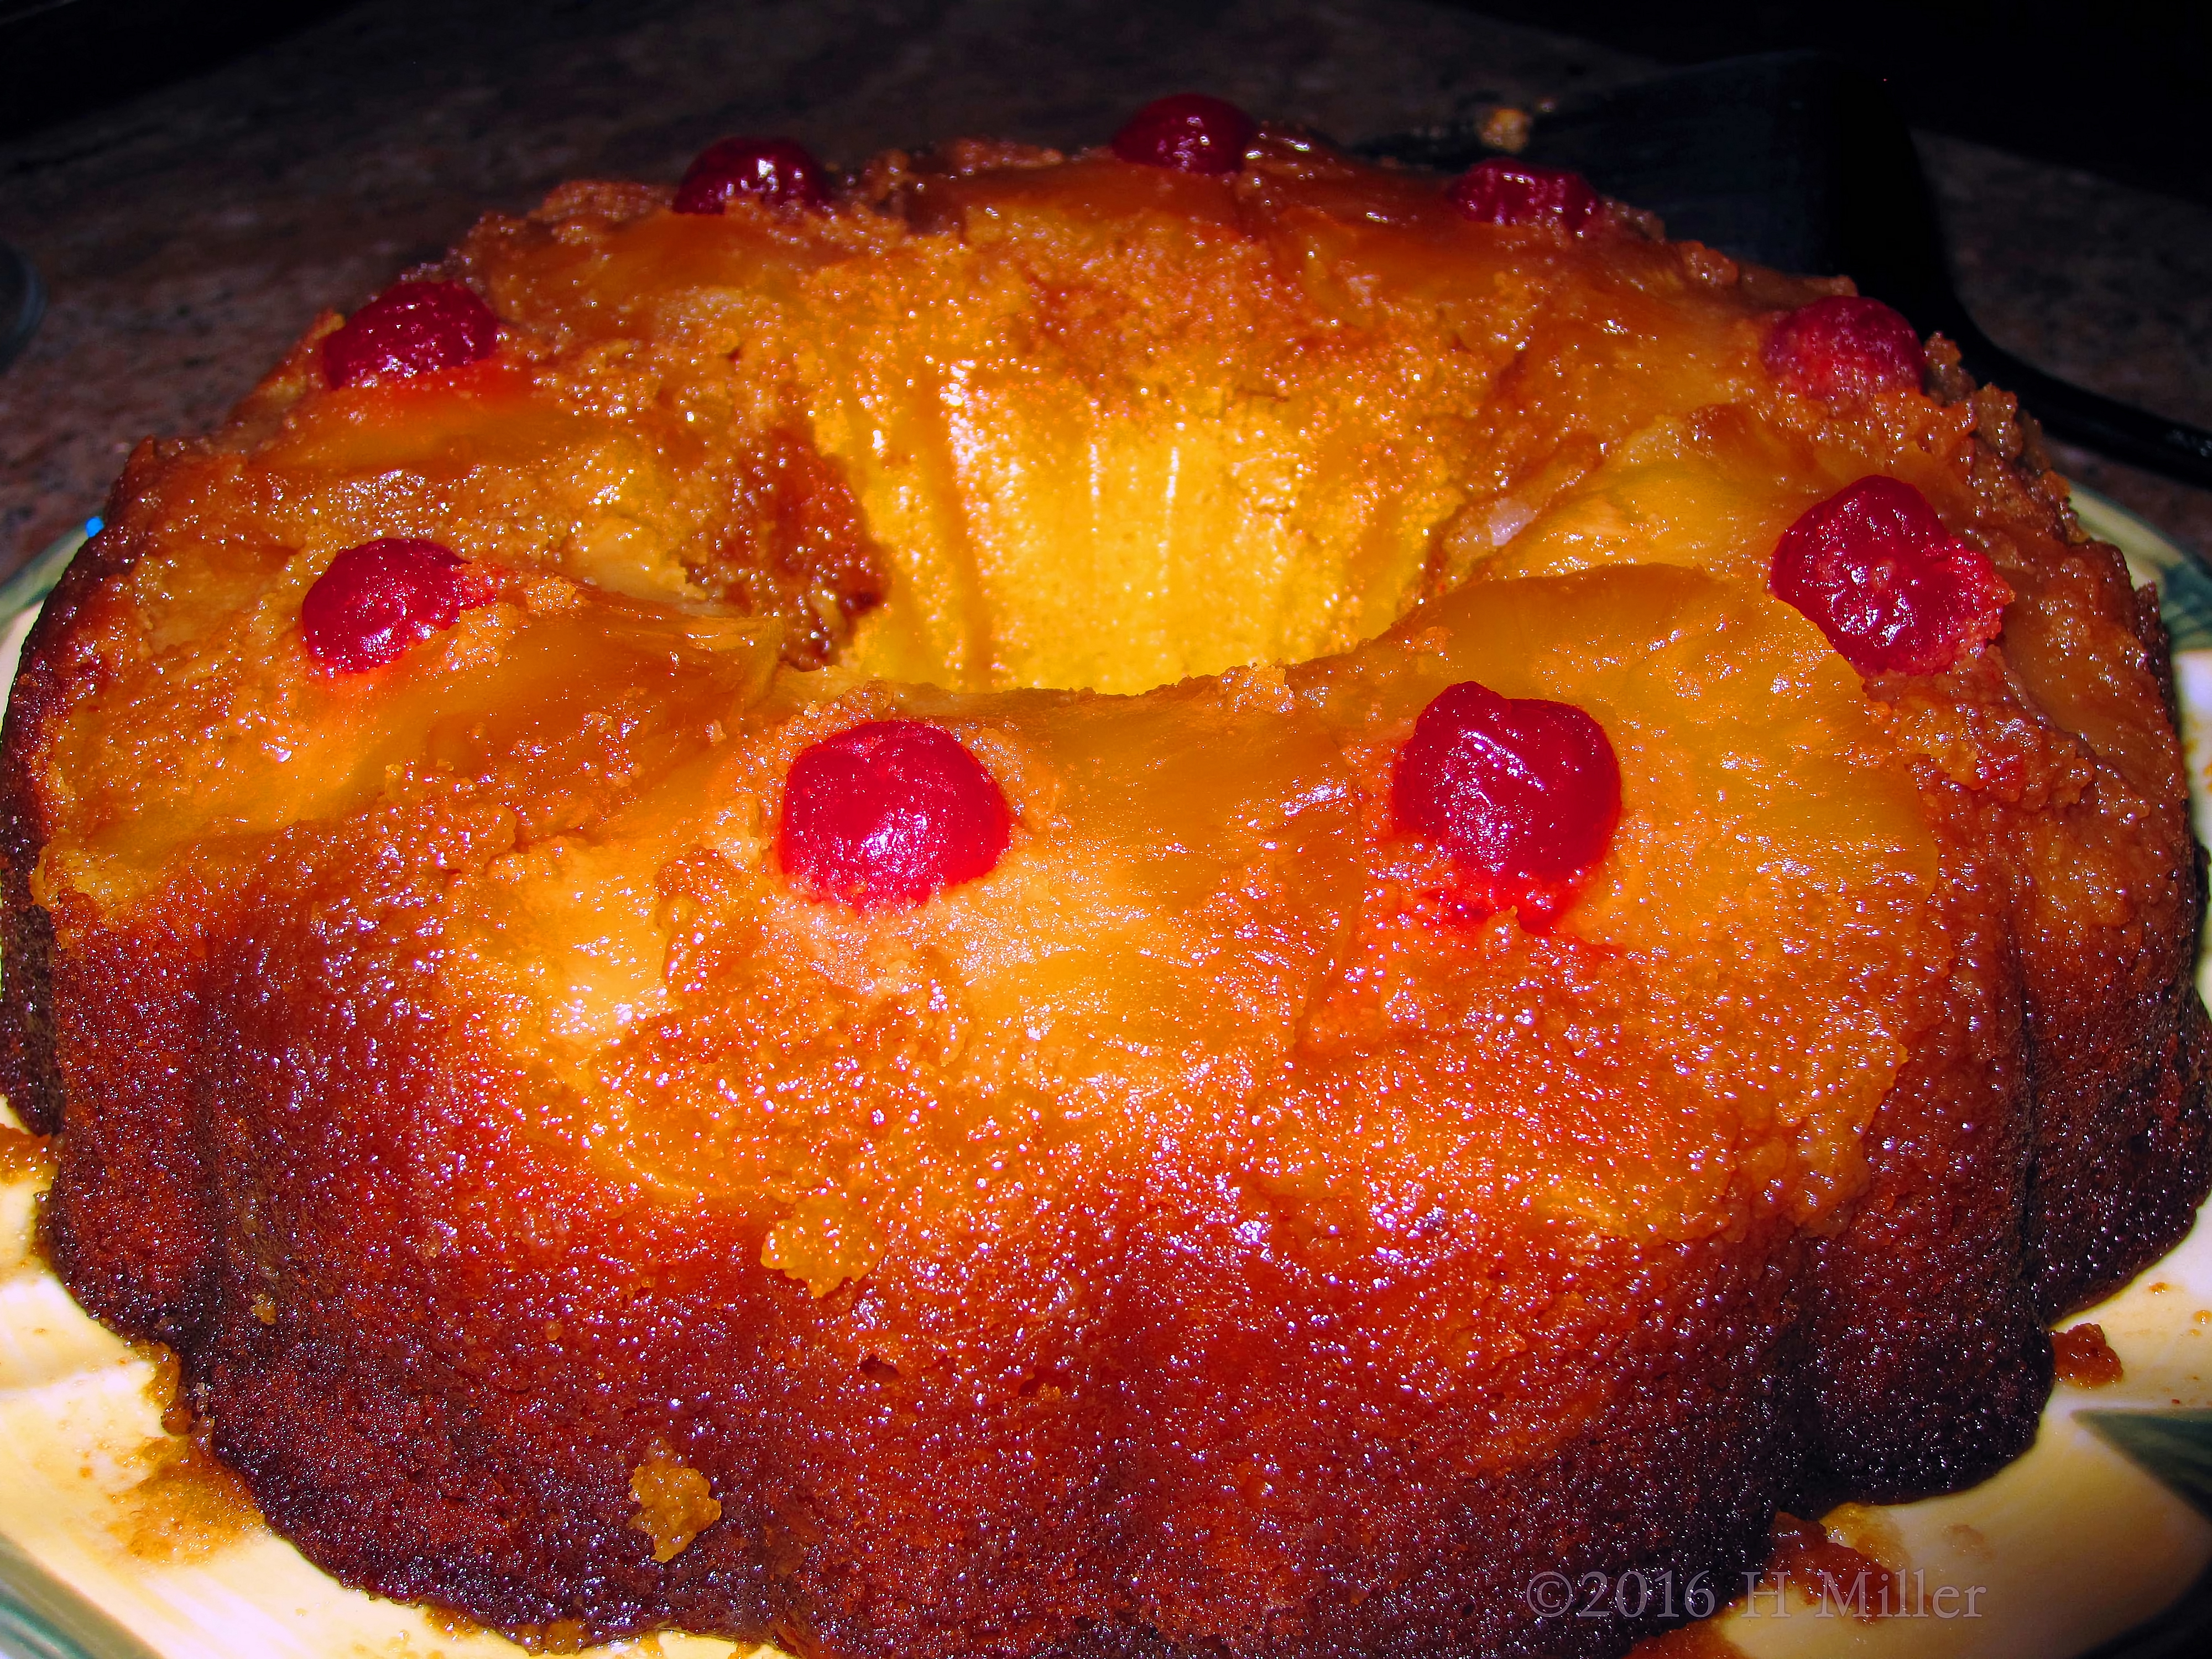 Delicious Upside Down Cake